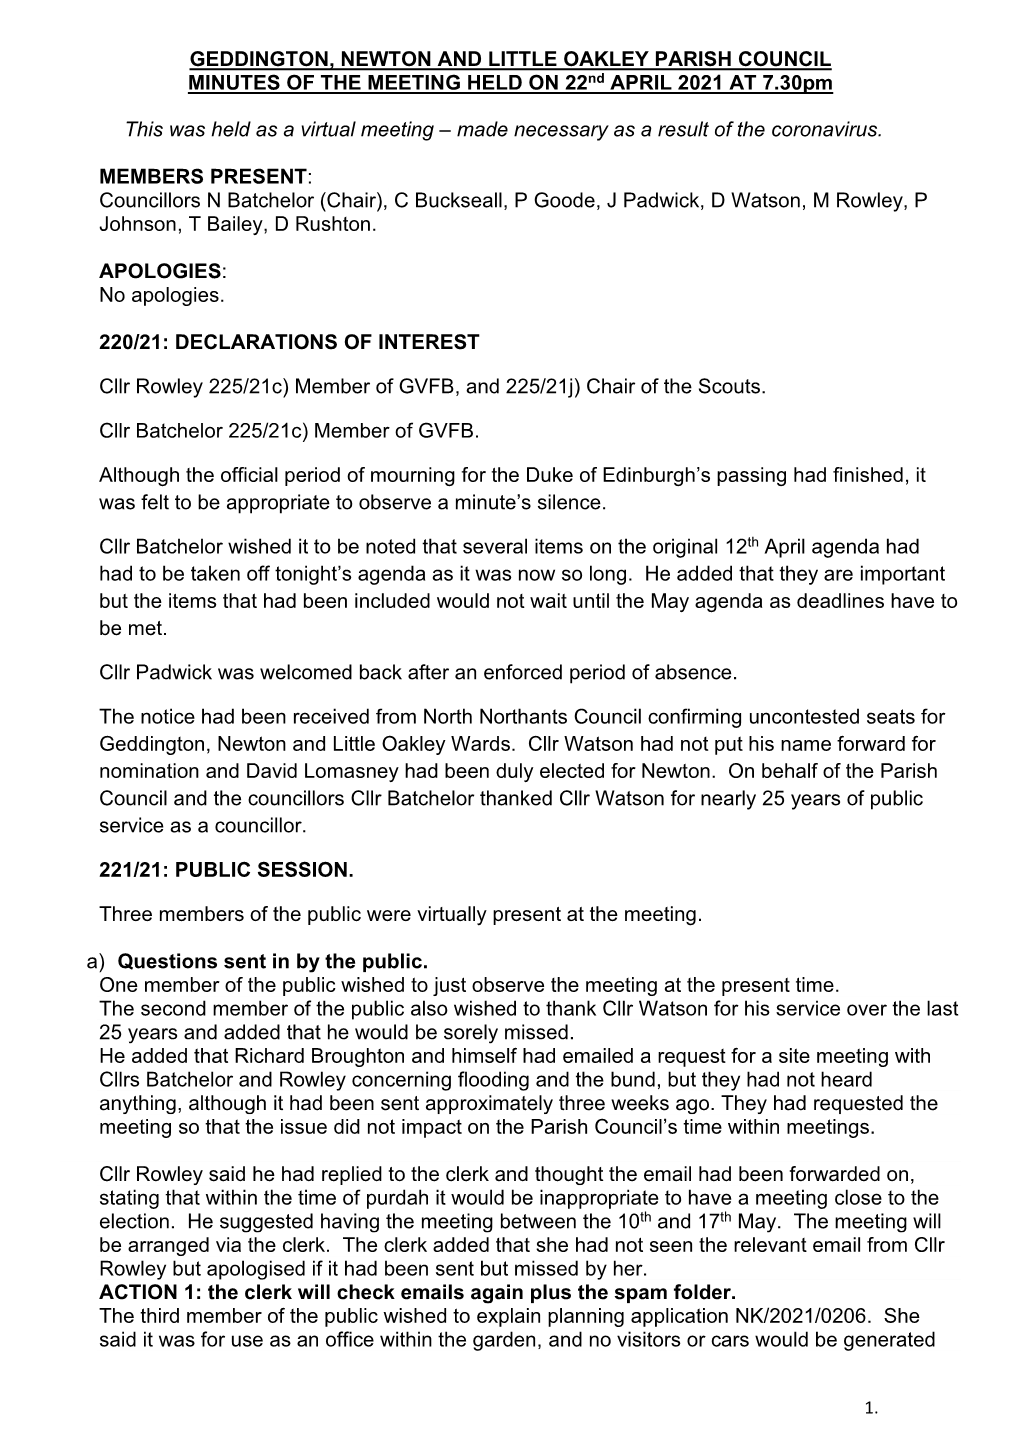 GEDDINGTON, NEWTON and LITTLE OAKLEY PARISH COUNCIL MINUTES of the MEETING HELD on 22Nd APRIL 2021 at 7.30Pm